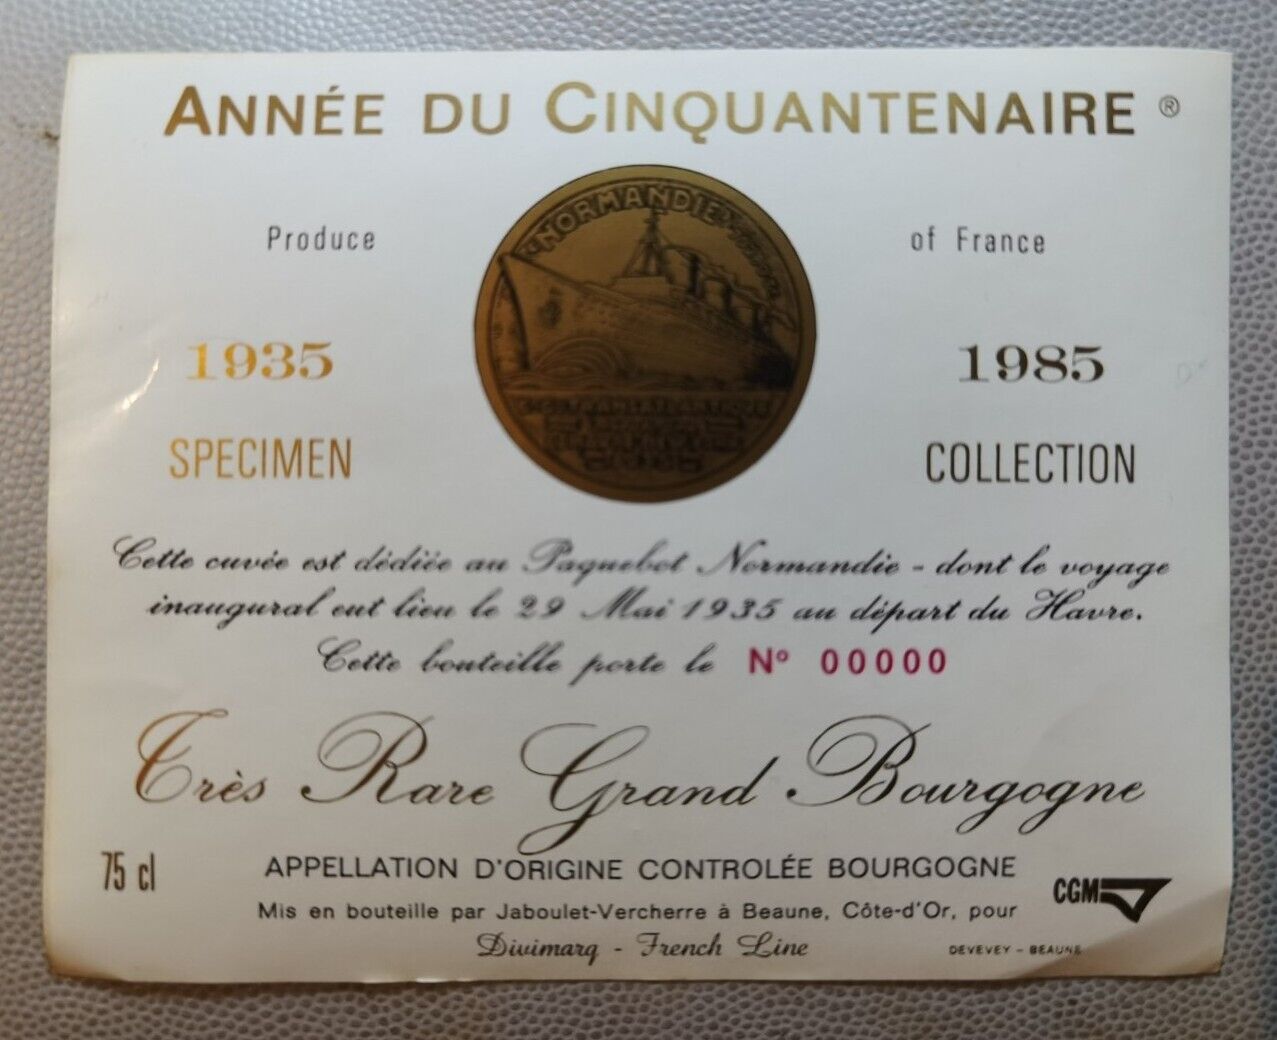 liner NORMANDY - wine label BOURGOGNE FIFTENAIRE 1985 FRENCH LINE 